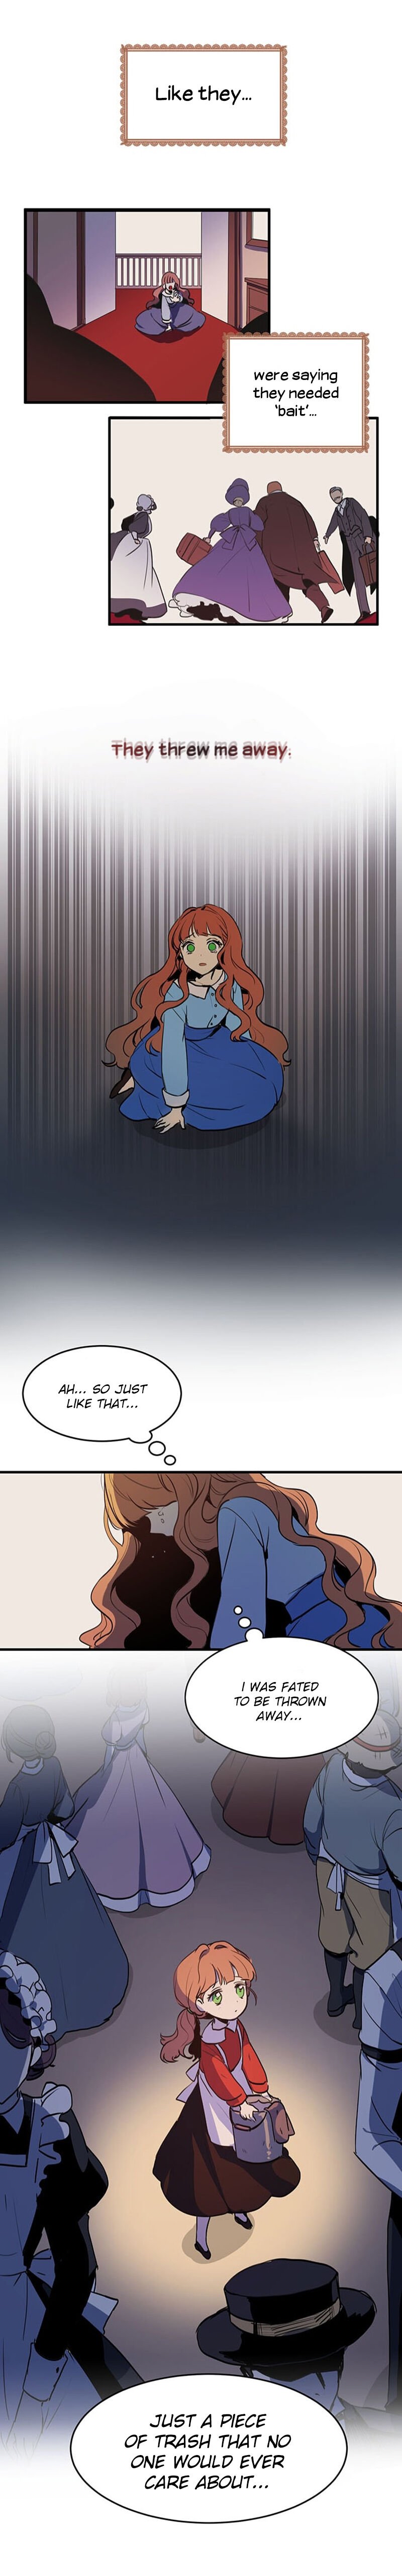 Why Are You Doing This, Duke? Chapter 1 - Page 7